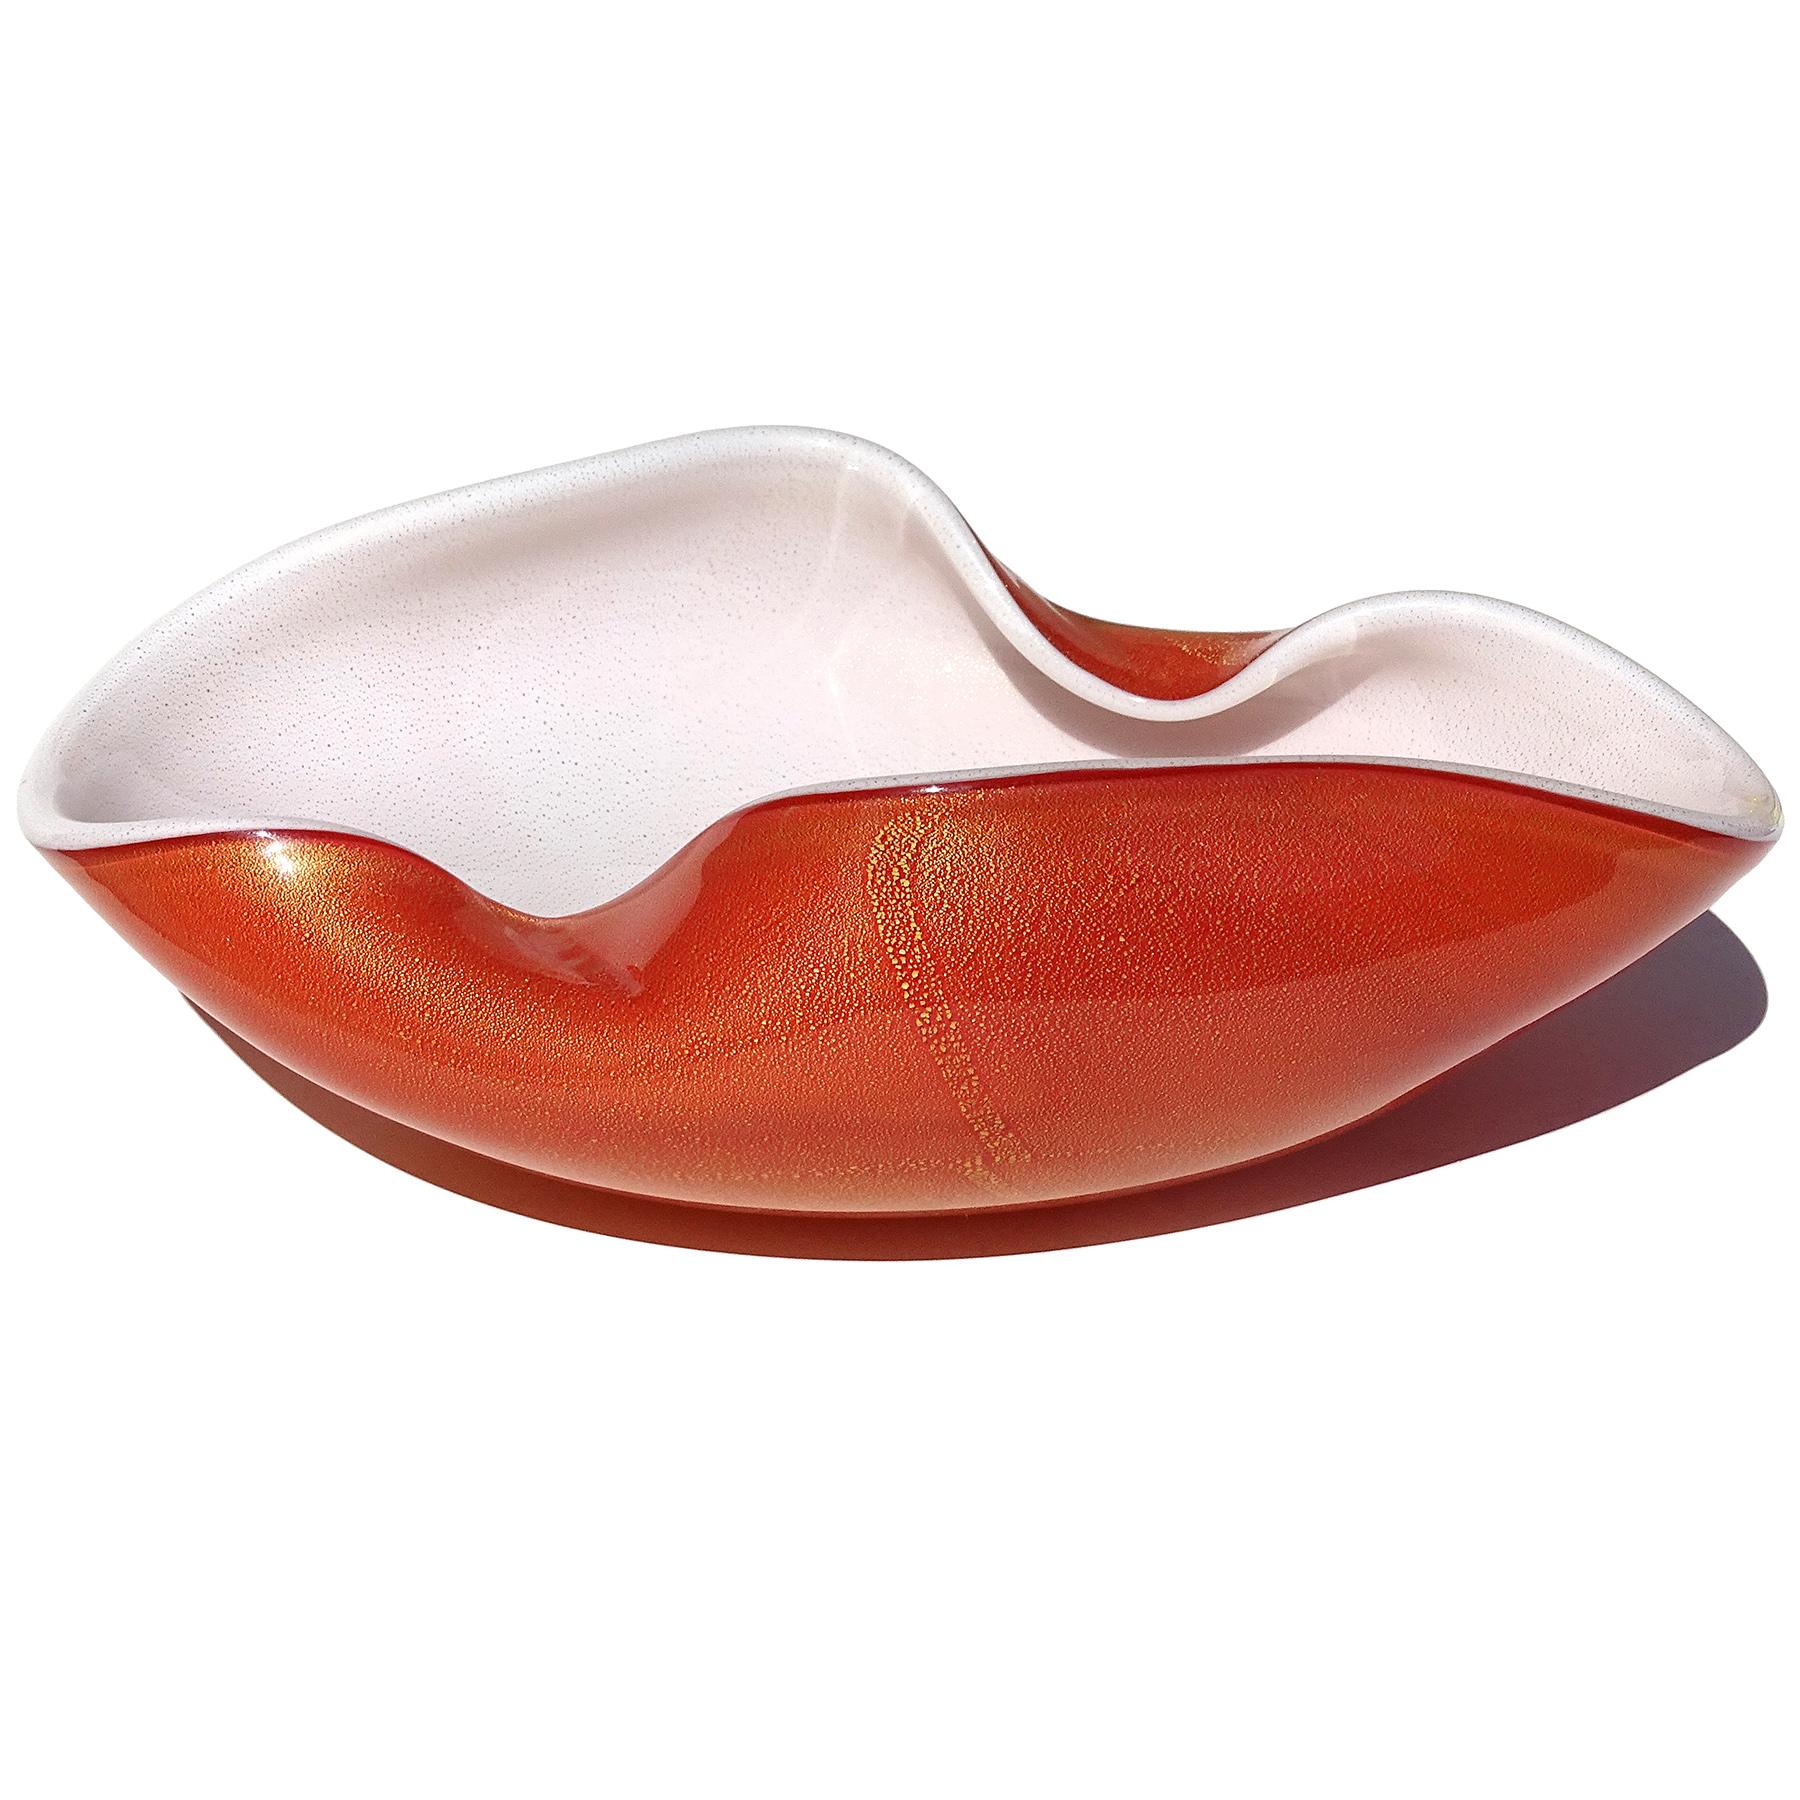 Beautiful and large vintage Murano hand blown orange over white, and gold flecks Italian art glass decorative bowl / centerpiece. Documented to Master glass artist and designer Alfredo Barbini, circa 1950-1960. Similar ones are published in his